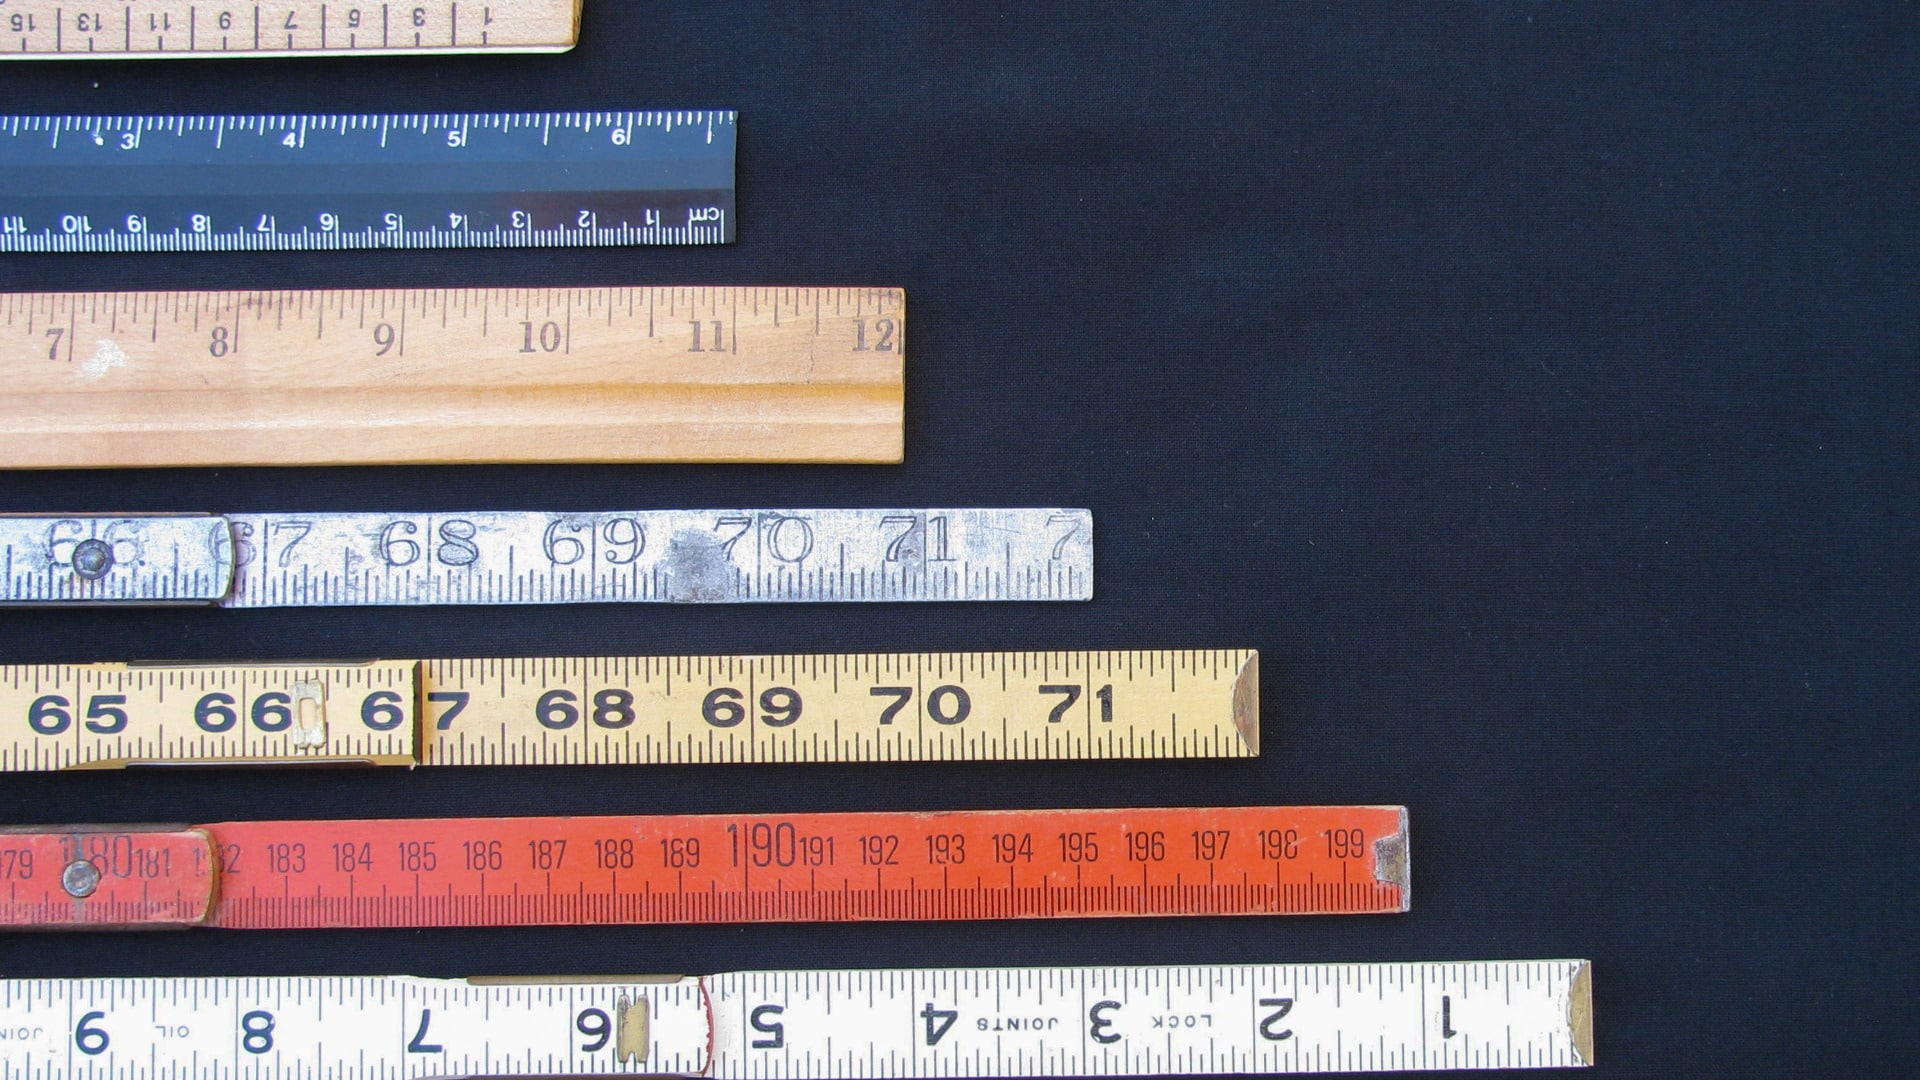 Several rulers of different colors stacked up to depict that many lifestyle changes observed are tools for tracking continuous improvement in the process of personal growth.